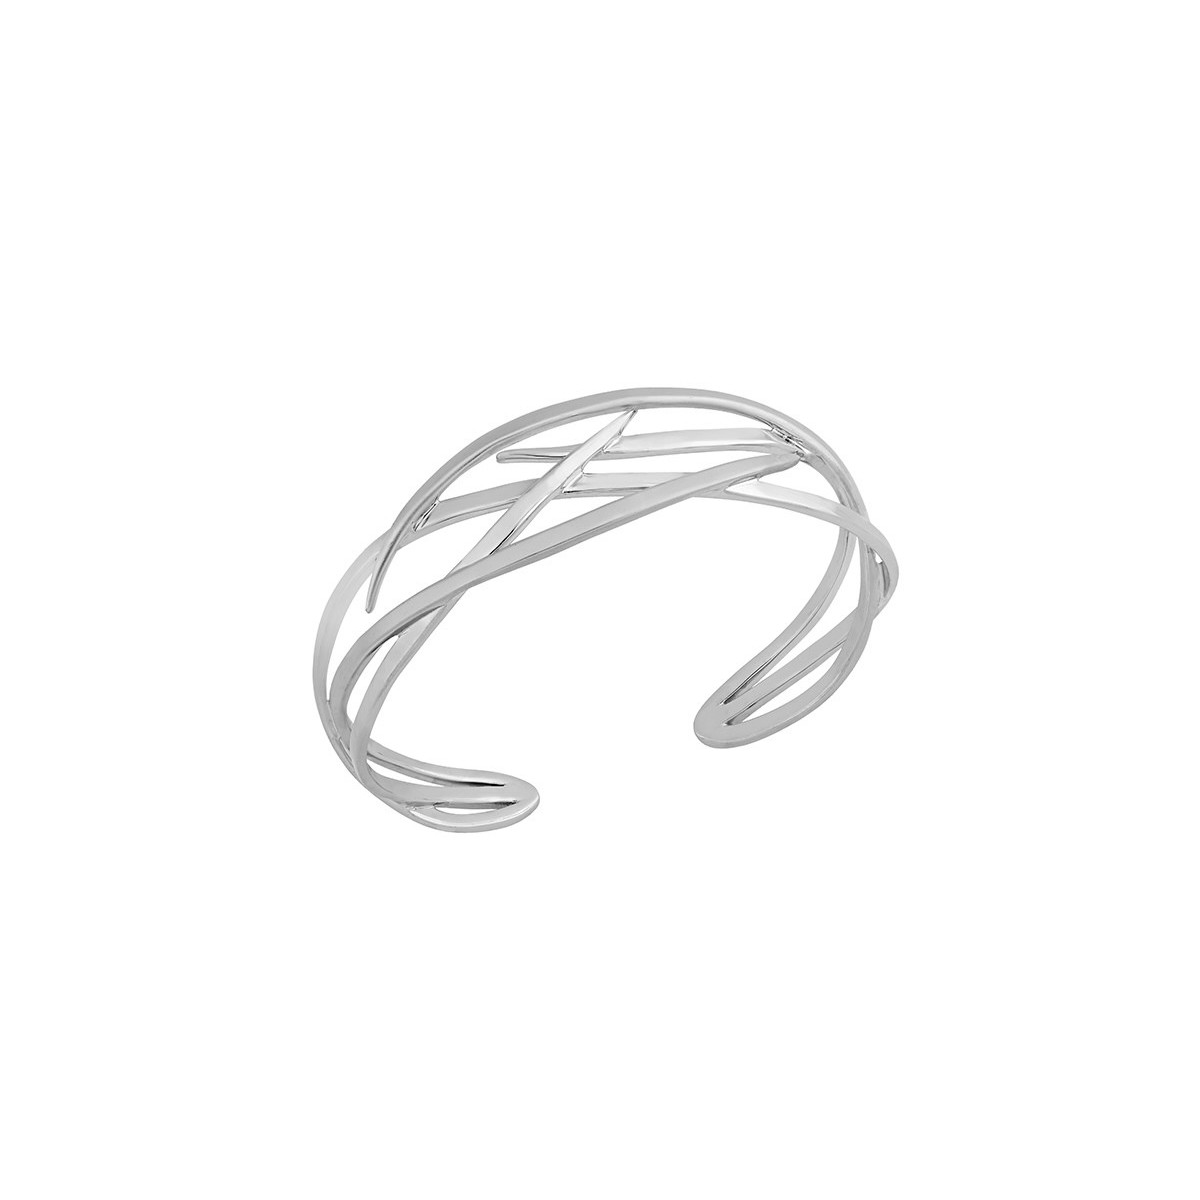 ROOTS Bangle in Silver.